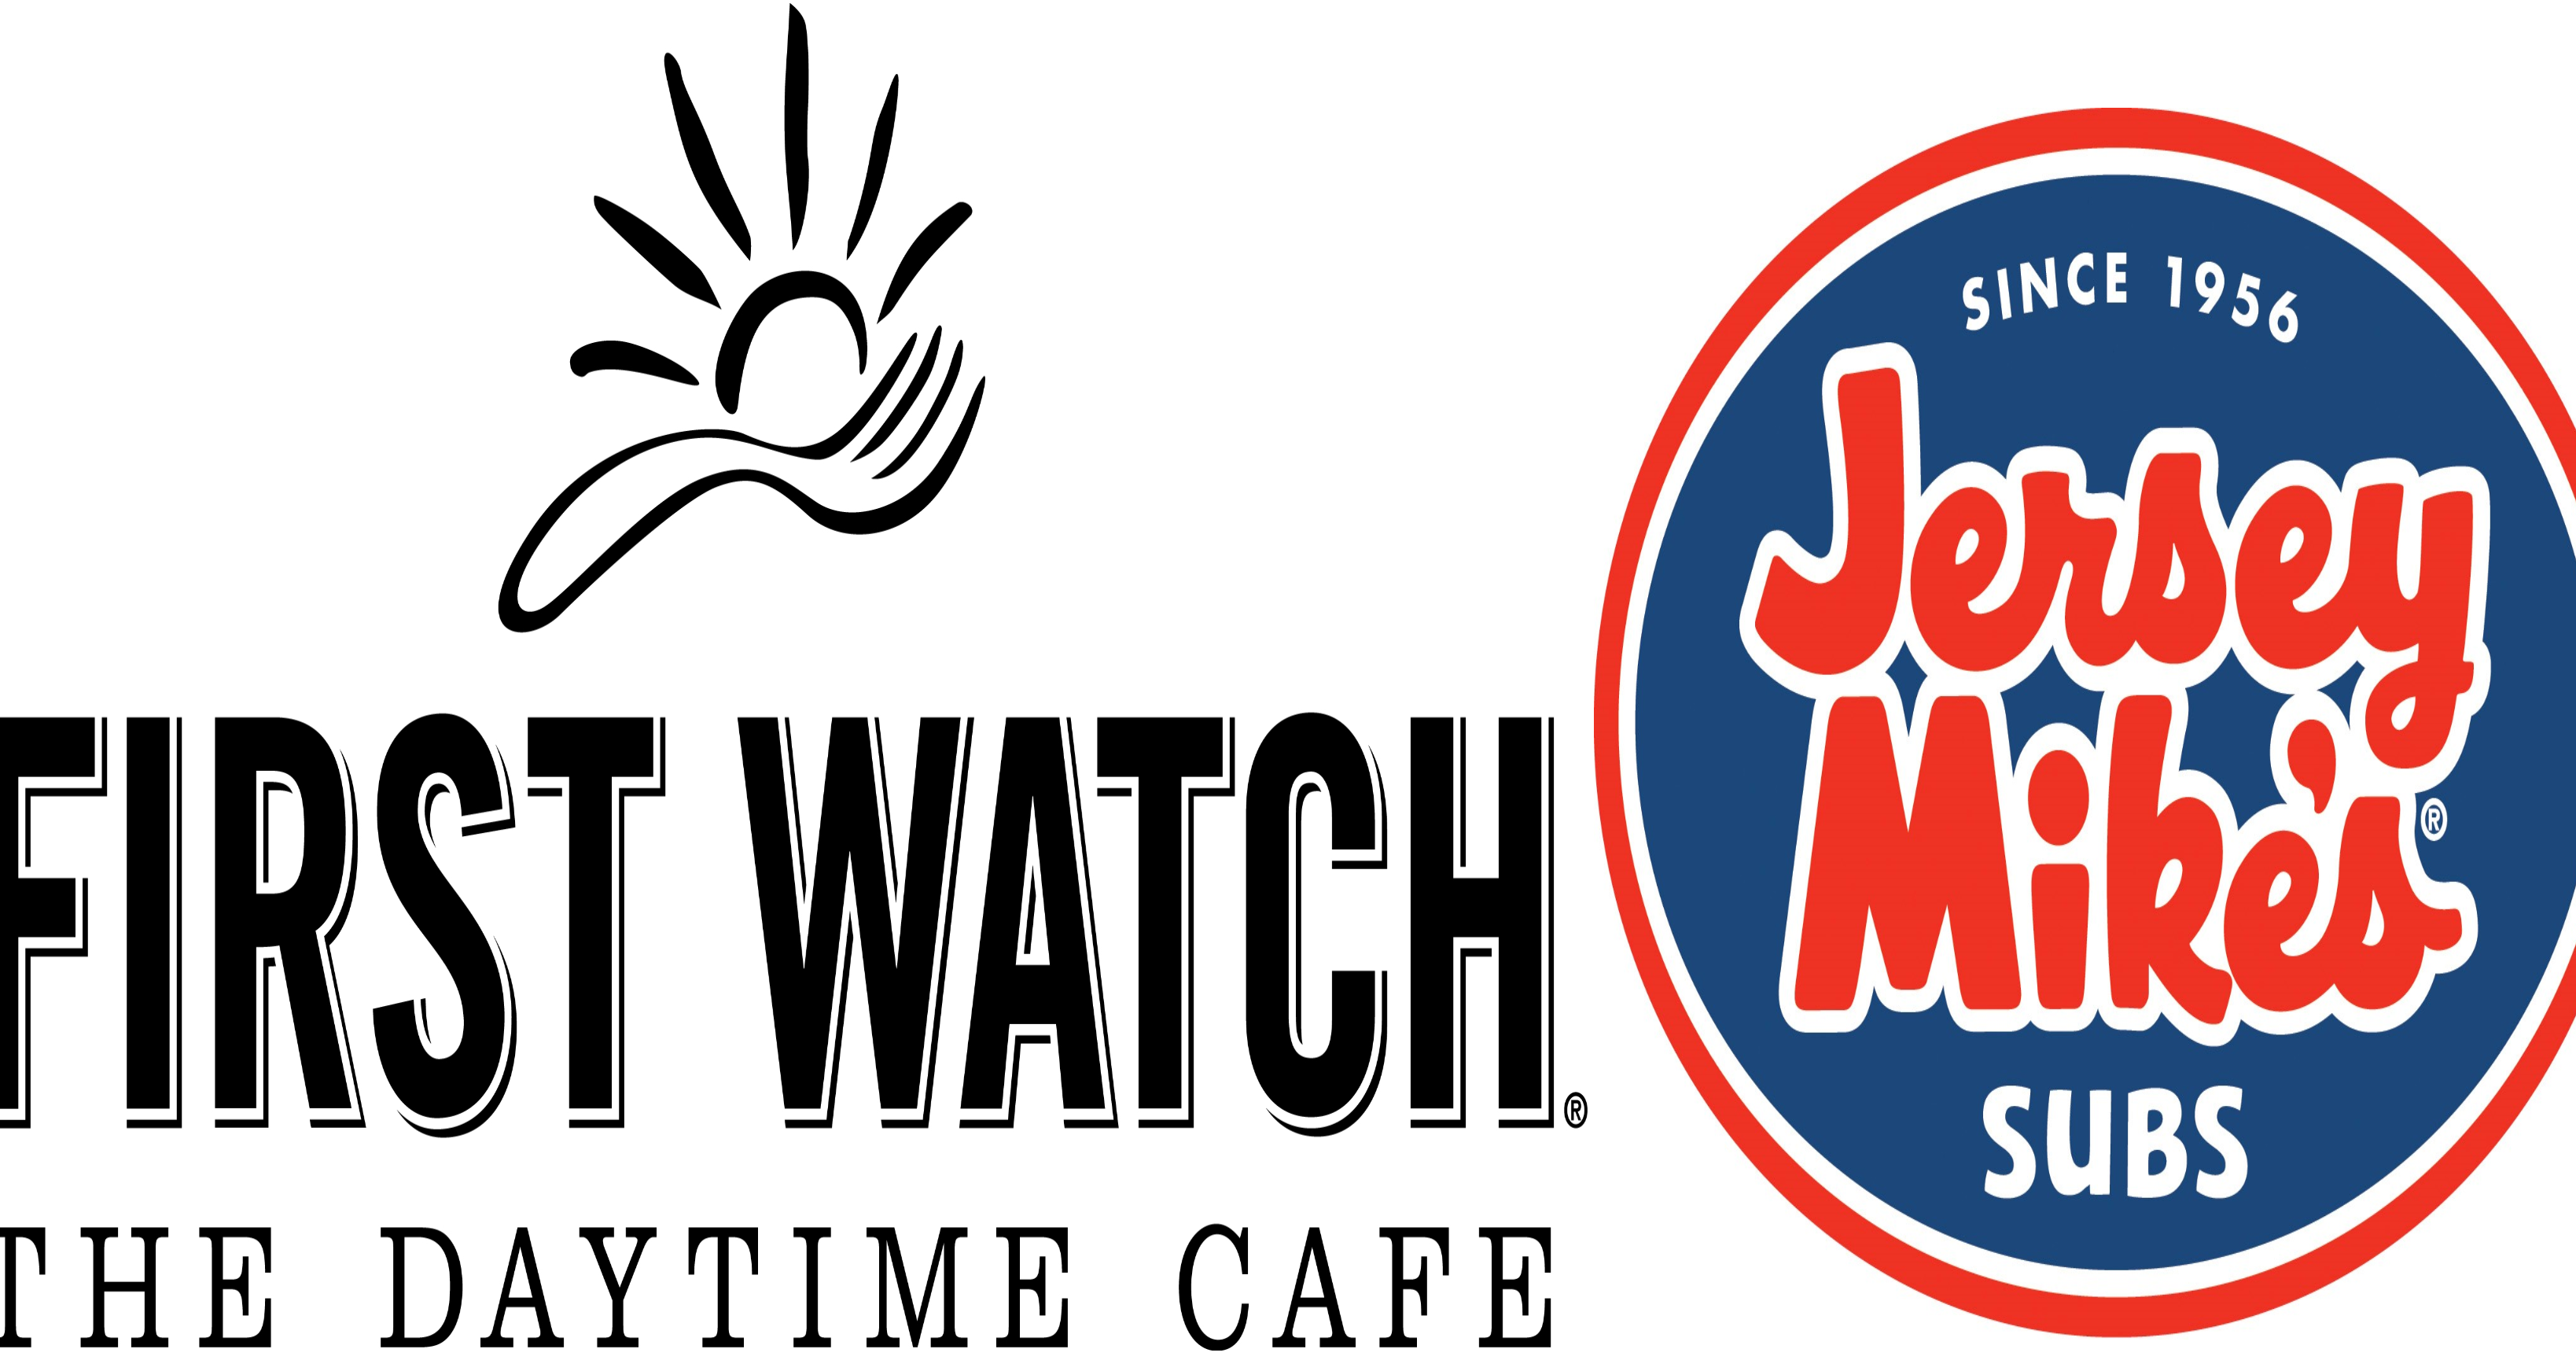 jersey mike's 9 mile road